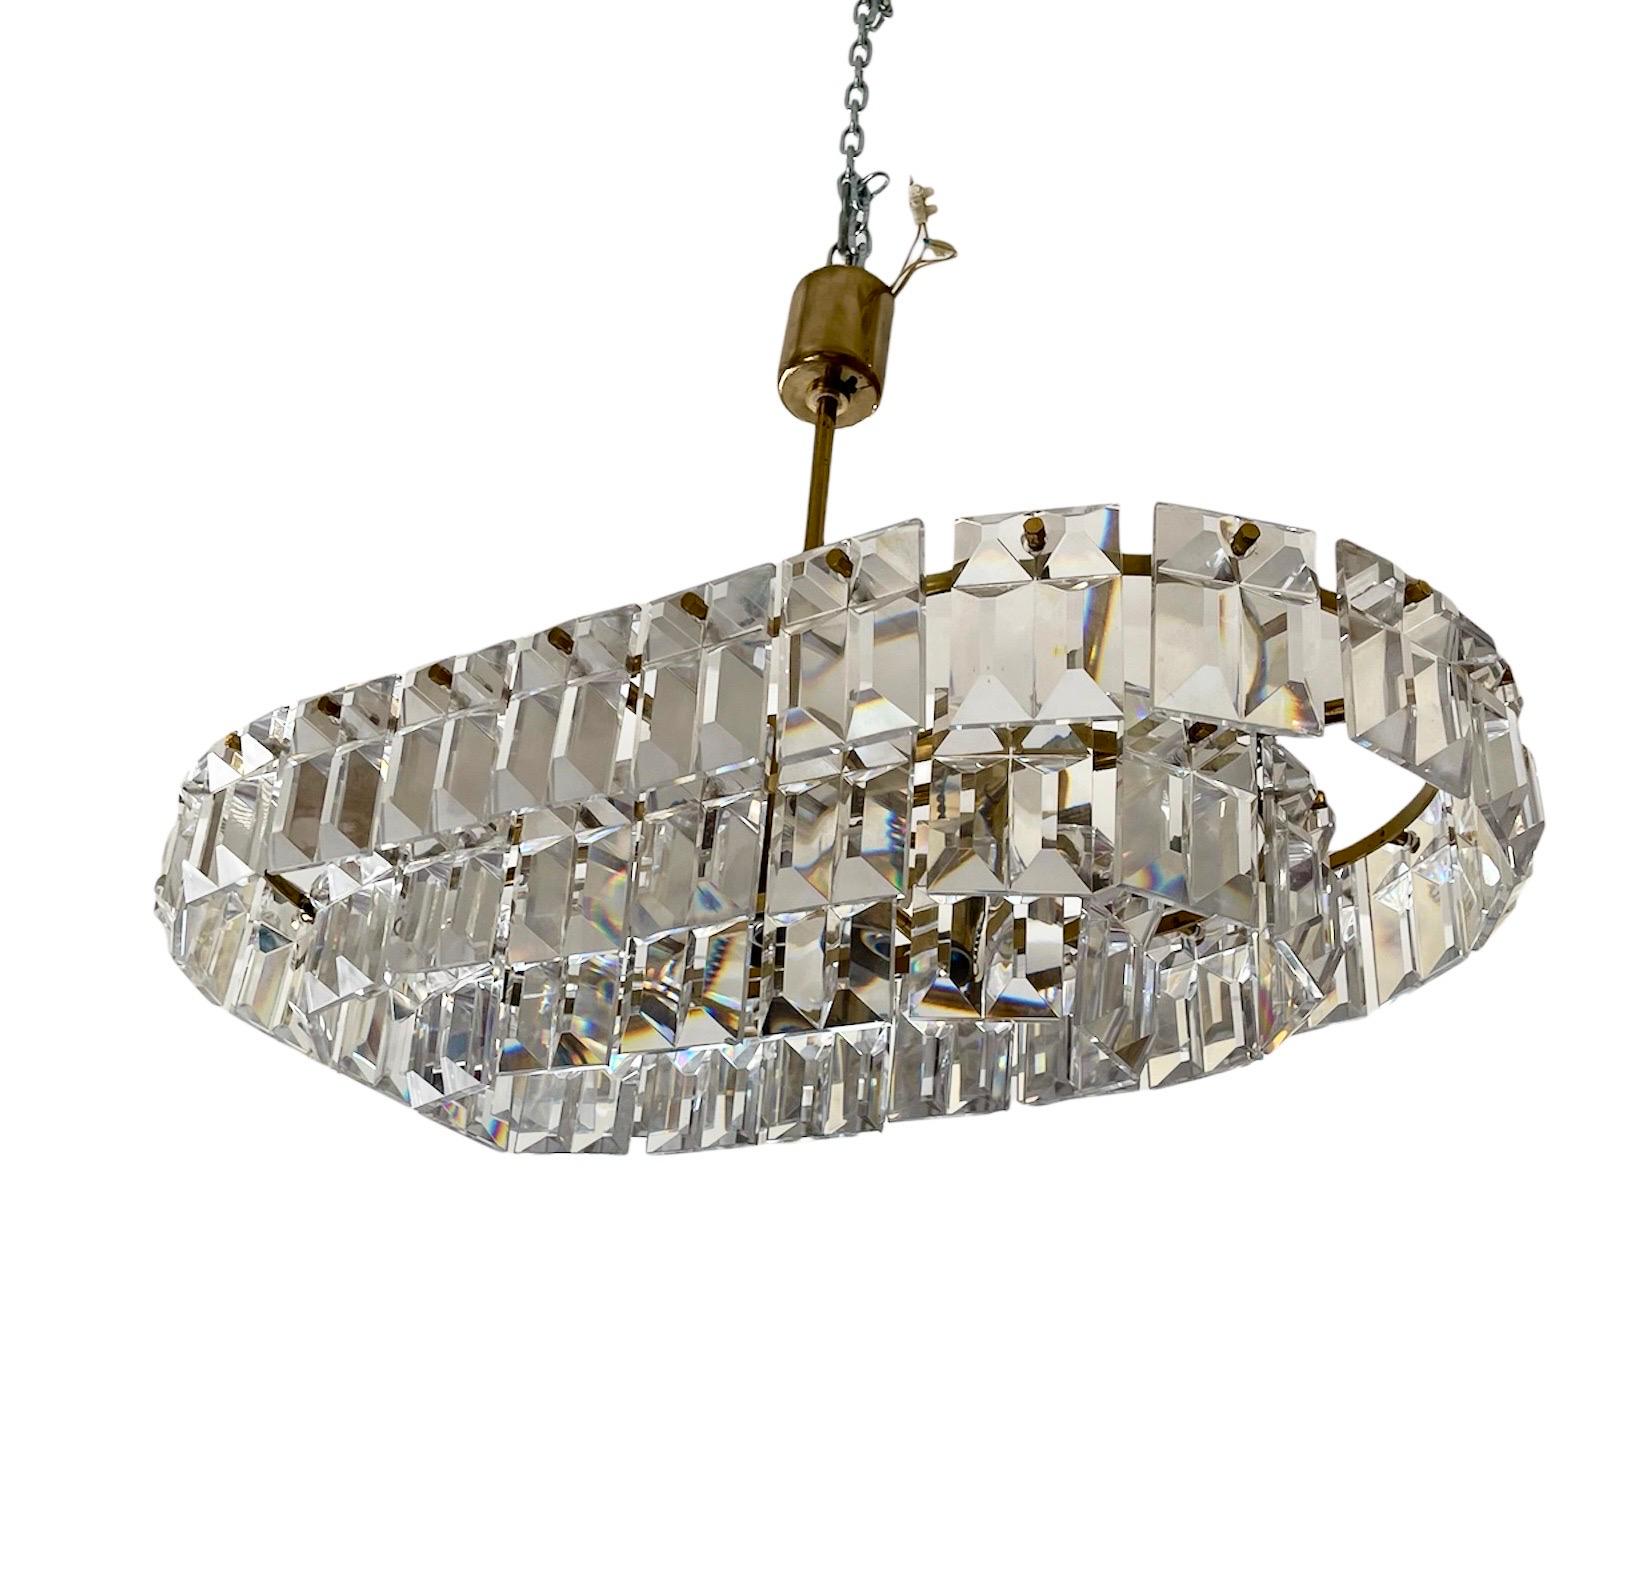 Exceptional Kinkeldey chandelier with large glass. The Design and the quality of the glass make this piece the best of the Austria Design.

This unique Kindeldey glass chandelier in cristal glass are exceptional.

This Pieces of Arts glass show the